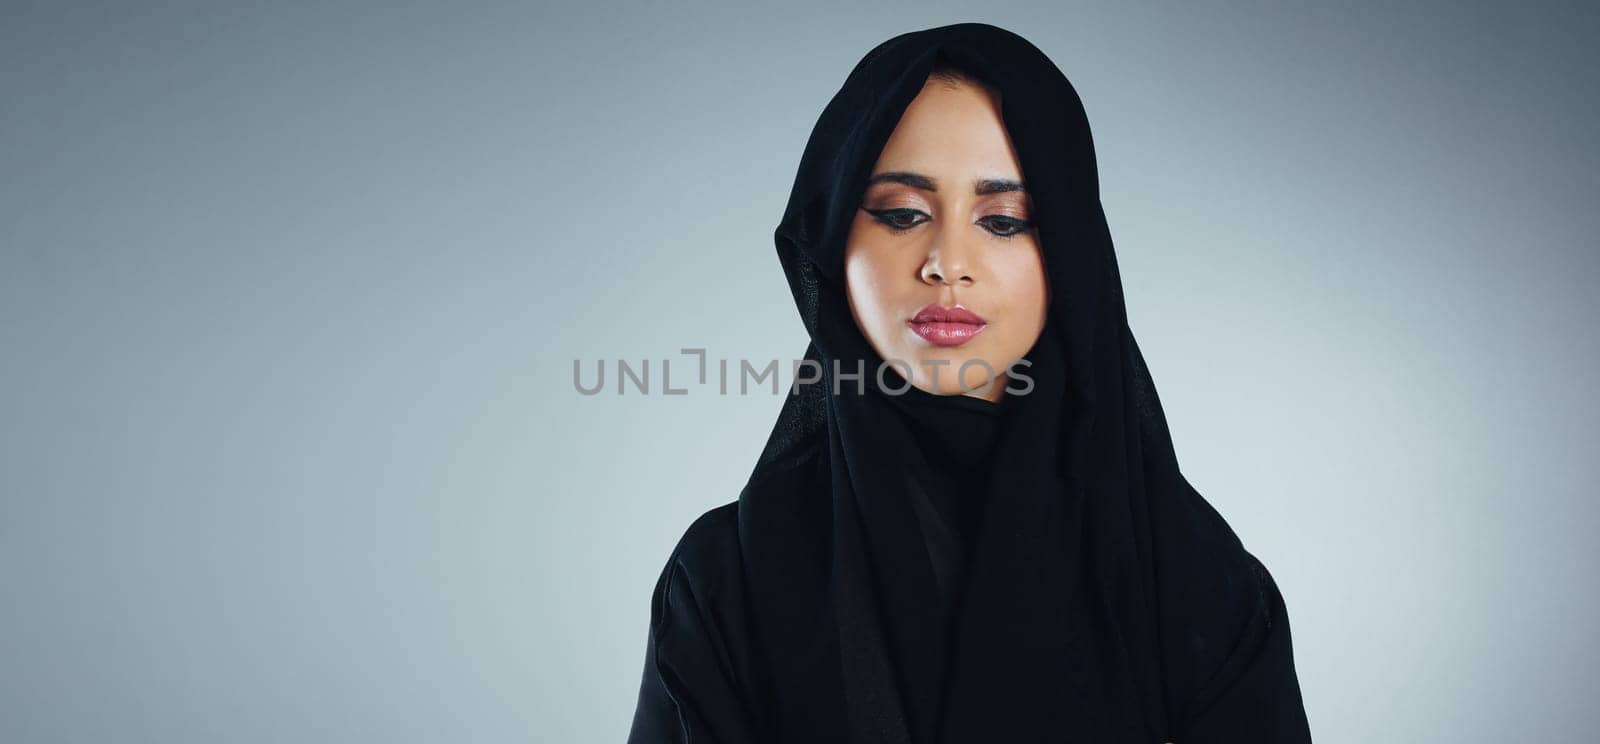 Shes got Islam in her heart. Studio shot of a young muslim businesswoman against a grey background. by YuriArcurs